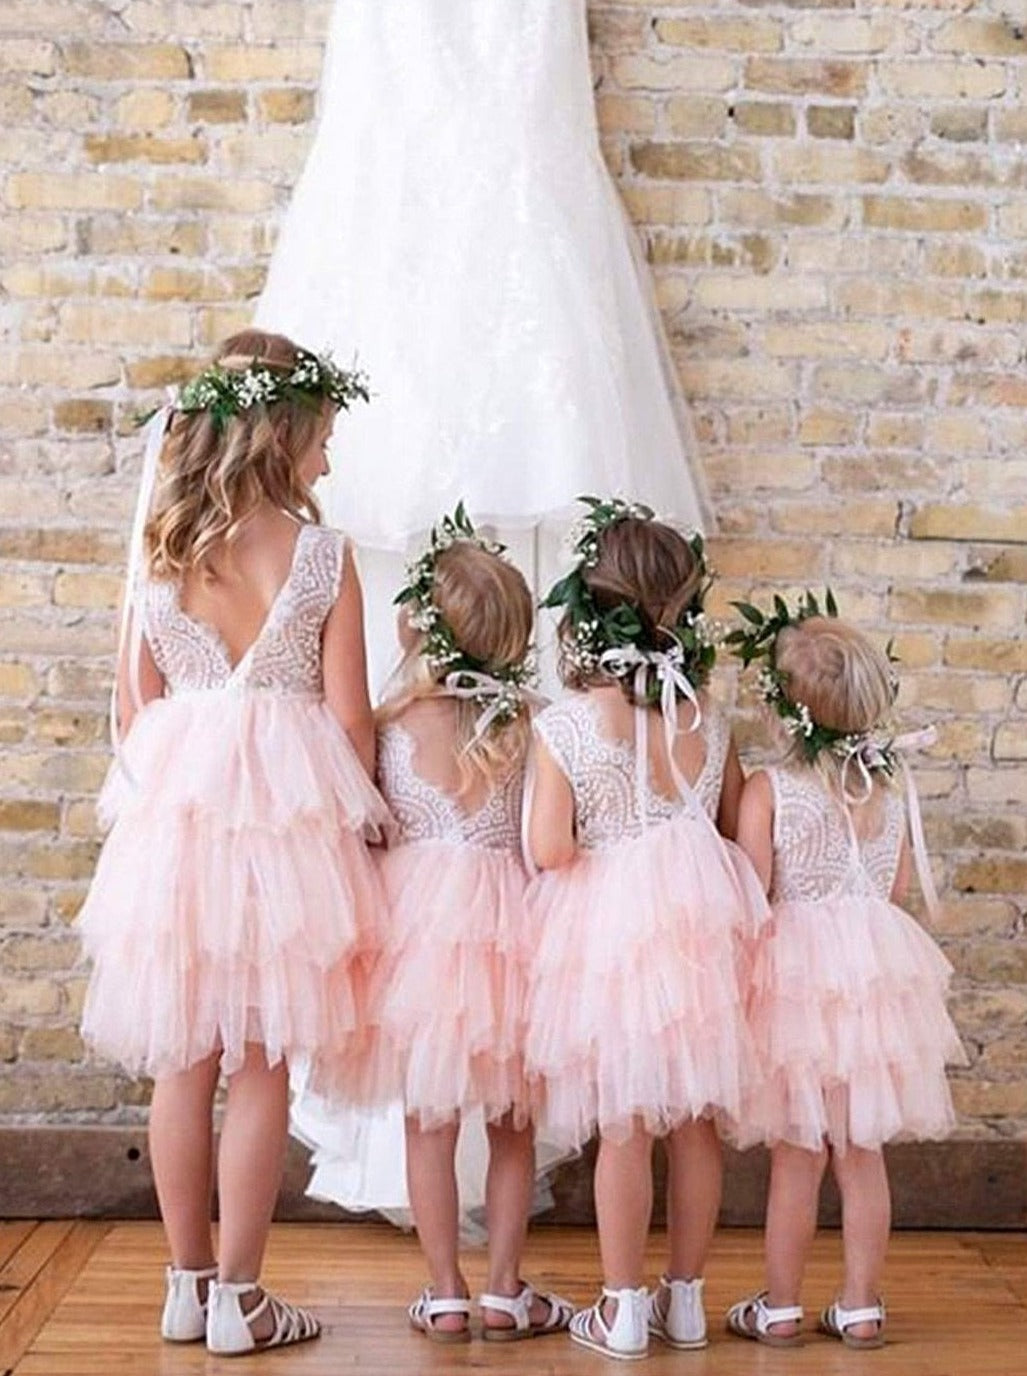 2Bunnies Flower Girl Dress Peony Lace Back A-Line Sleeveless (BEADED) Tiered Tulle Short (Pink) - 2BUNNIES